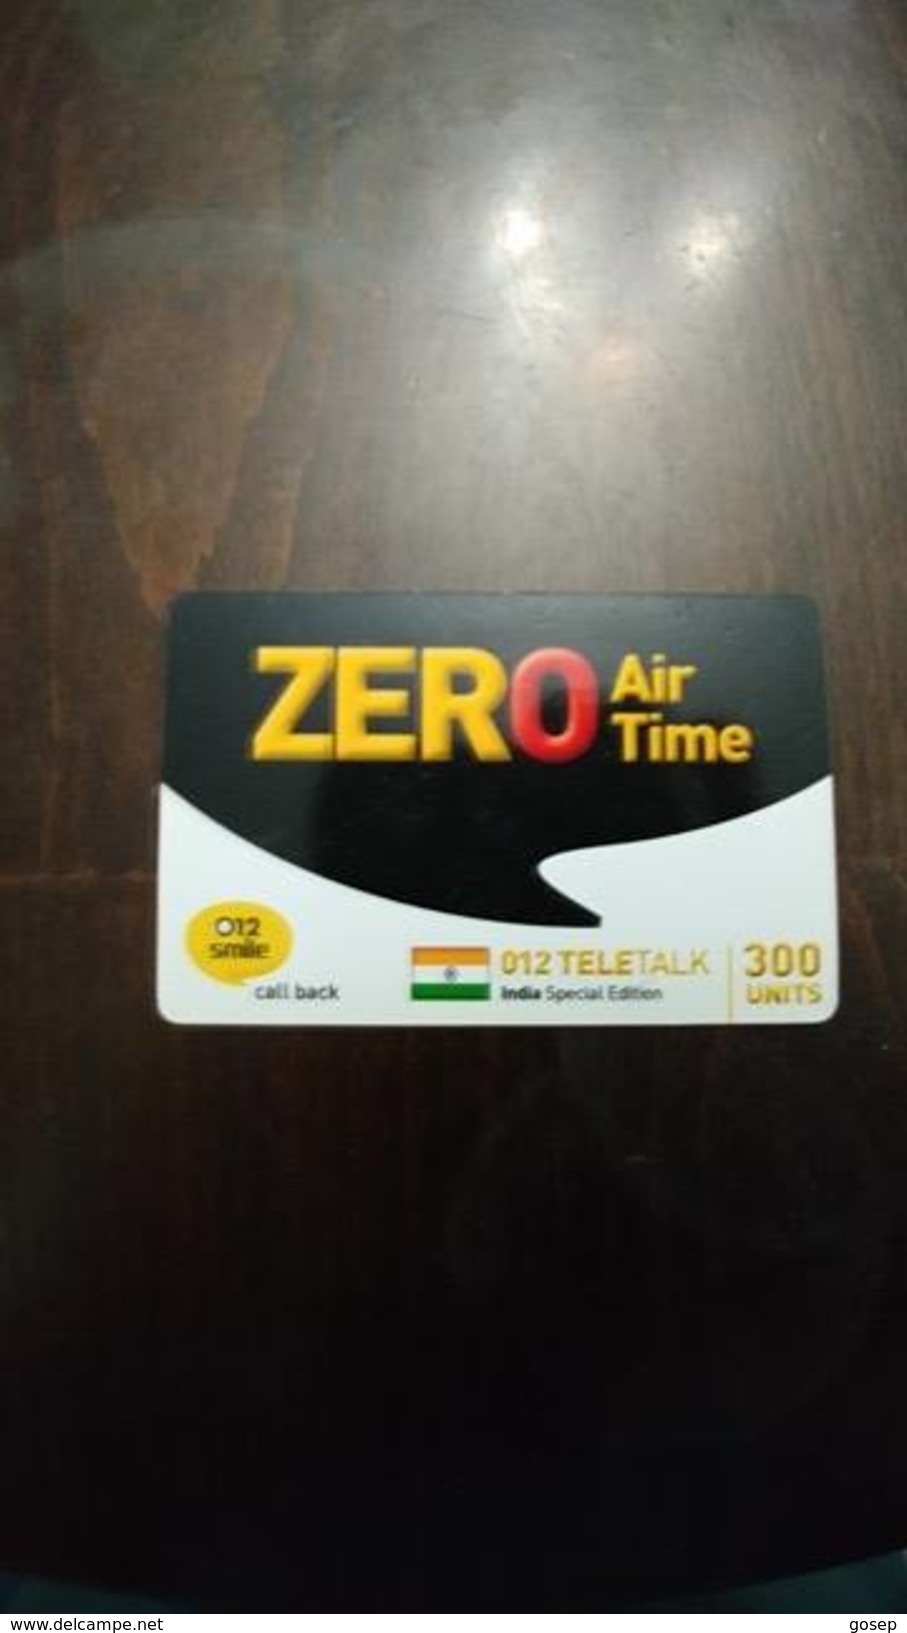 Israel-ZERO-air Time-(28)-012 Teletalk-india Special Edition-(300units)-(012smile Call Back)-out Side - Indien